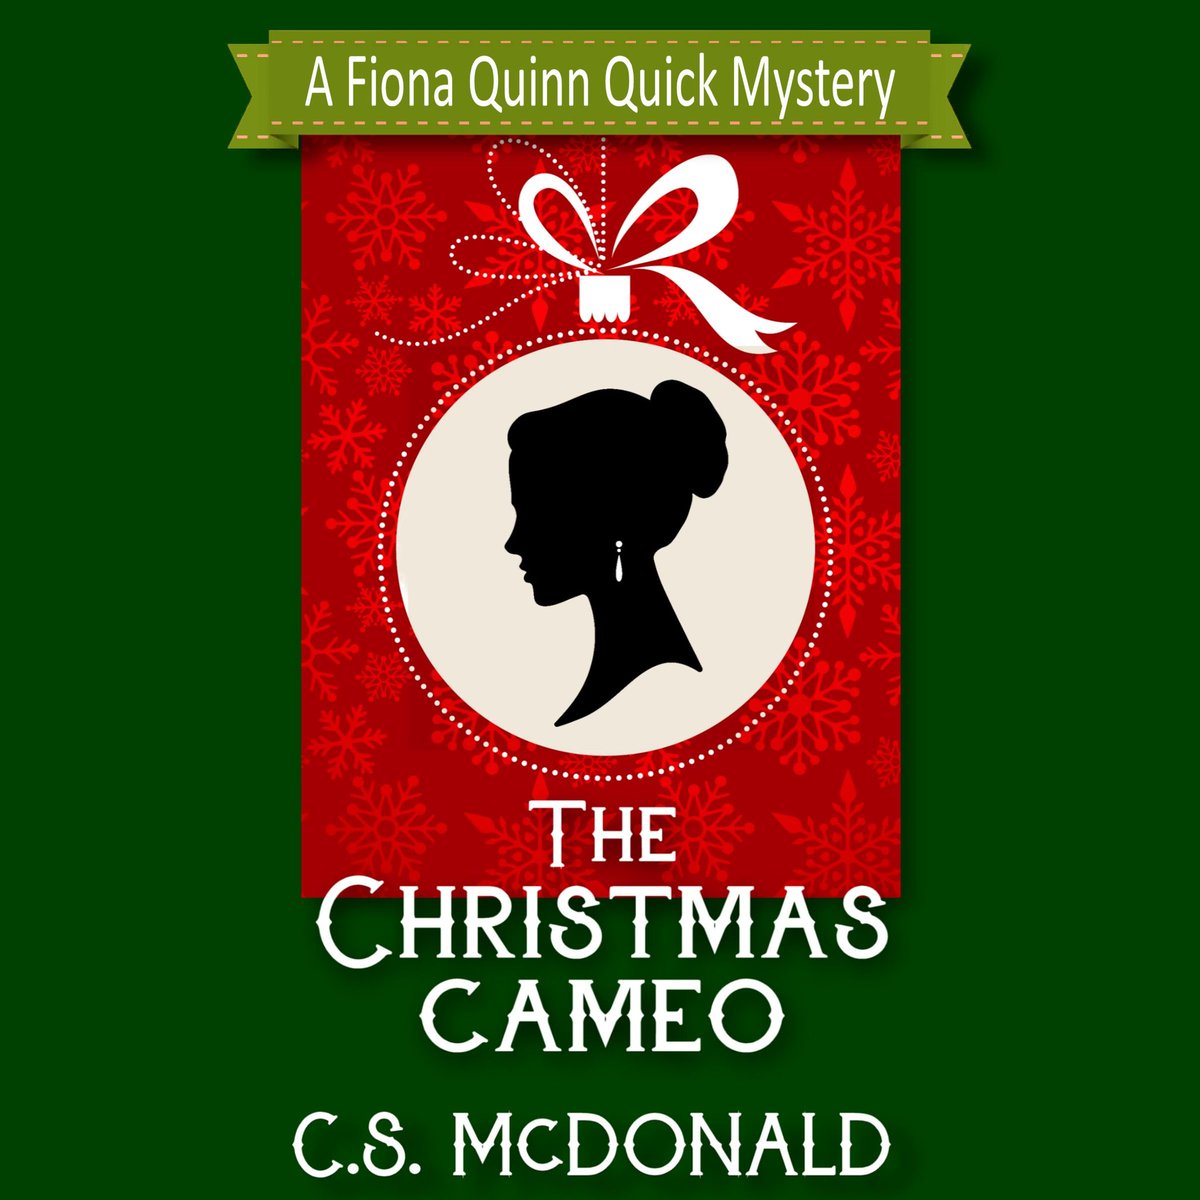 This humorus, heart-warming #Christmas #shortstory/#cozymystery by @CSMcDonald7 is #NowAvailable on #audiobook from #FionaQuinnQUICKMysteries--sit back, relax, and #listen today! adbl.co/2rI6kUt
#Free with an #Audible trial!